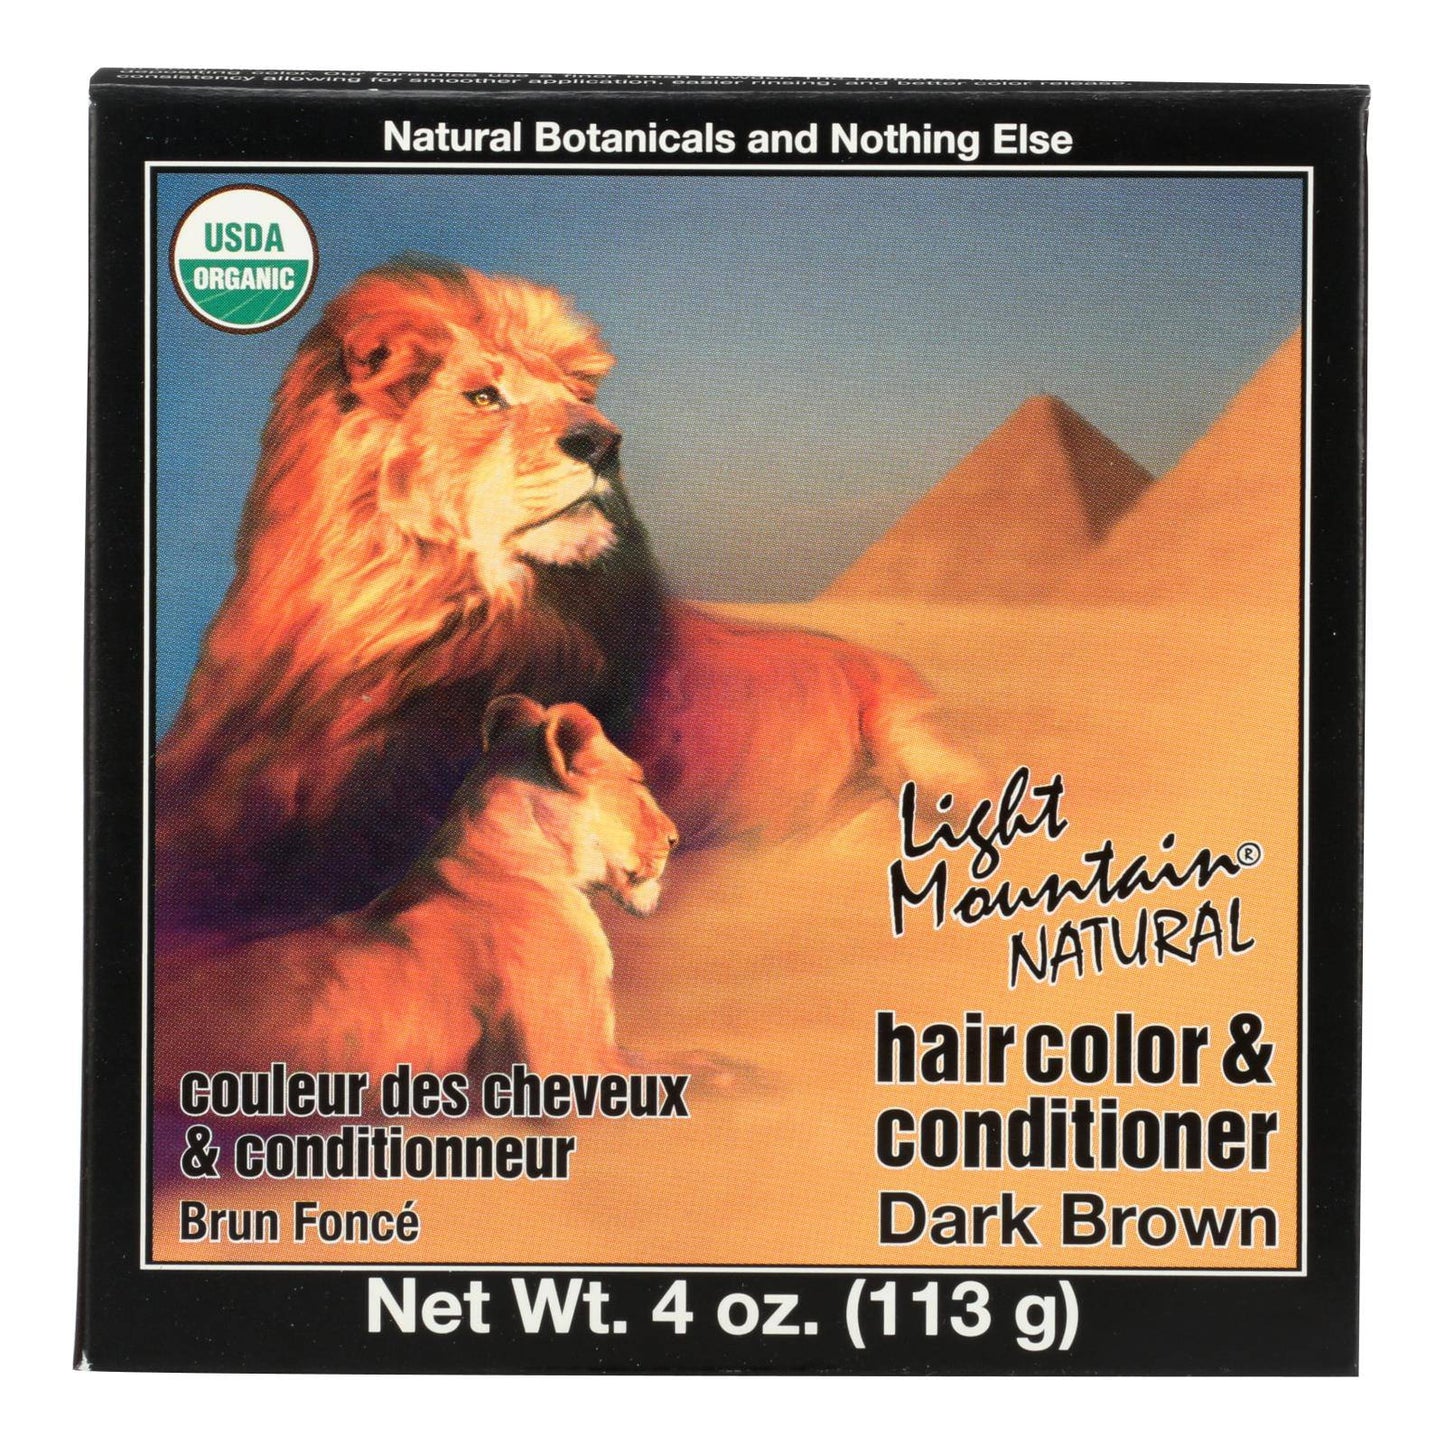 Buy Light Mountain Organic Hair Color And Conditioner - Dark Brown - 4 Oz  at OnlyNaturals.us